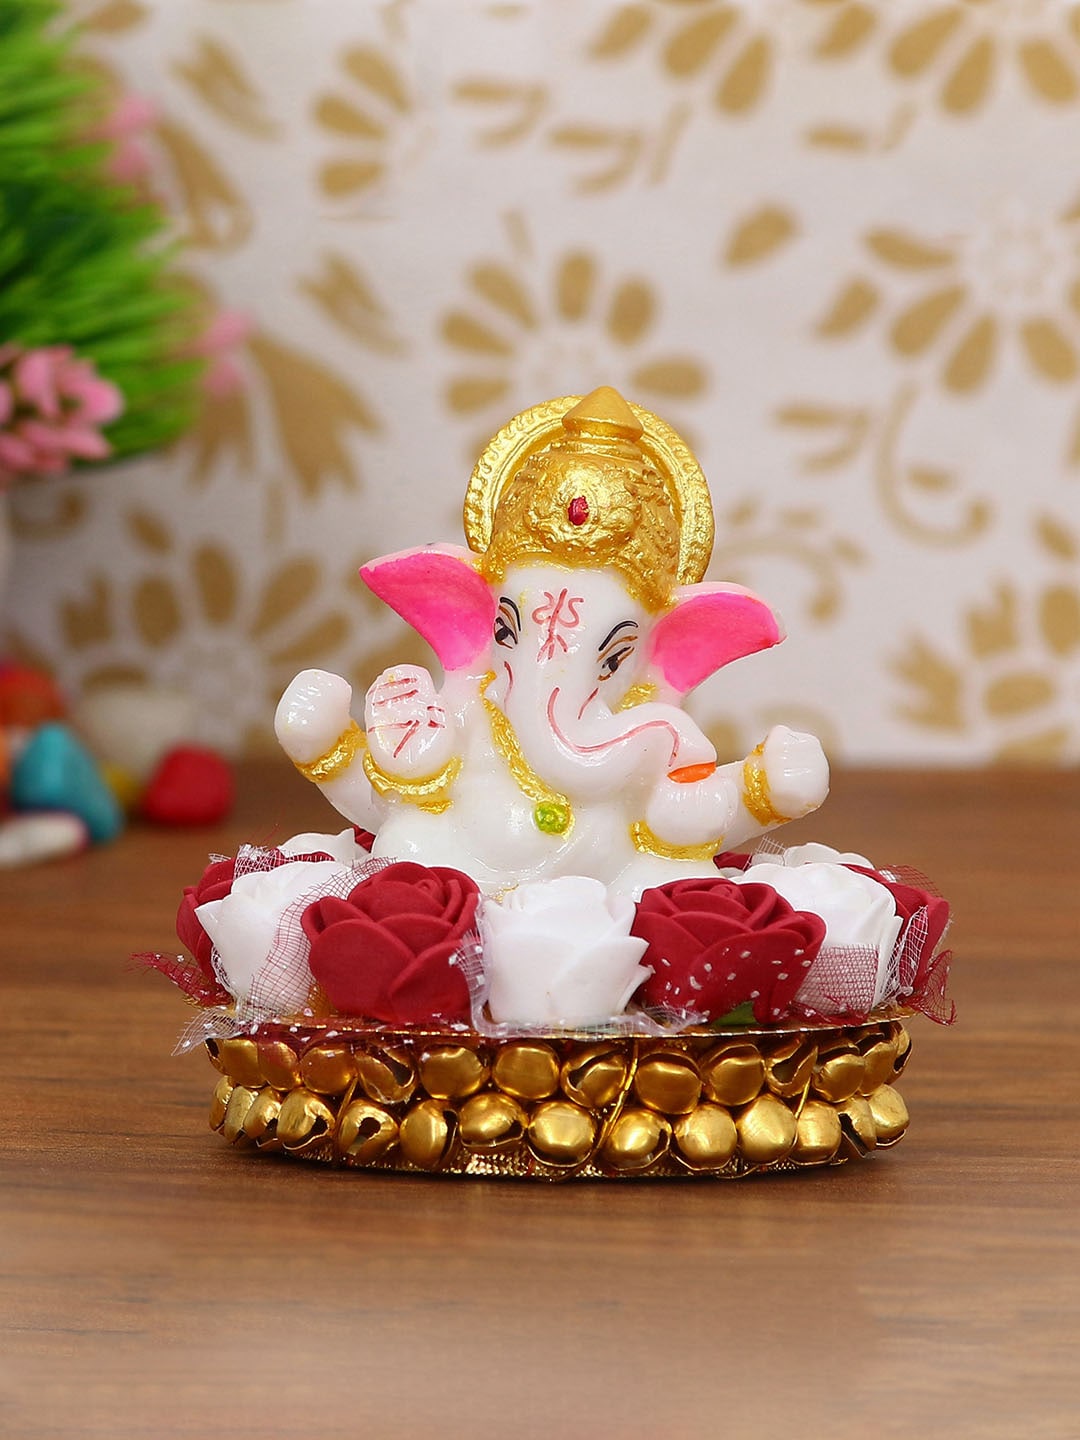 eCraftIndia White & Gold-Toned Handcrafted Lord Ganesha Idol on Decorated Plate Price in India